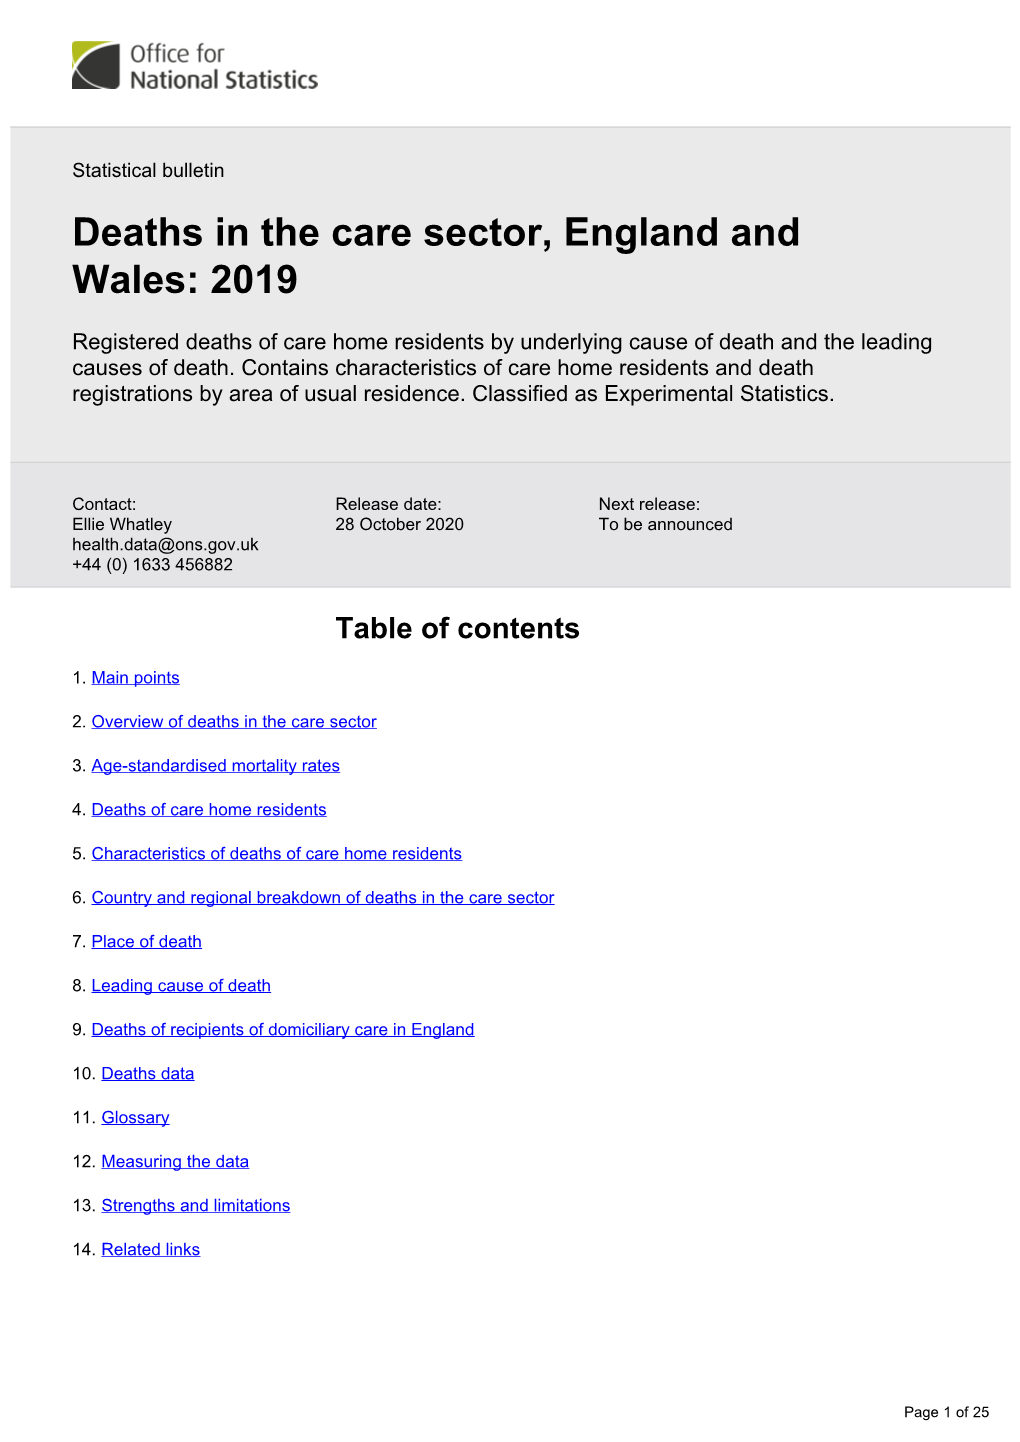 Deaths in the Care Sector, England and Wales: 2019